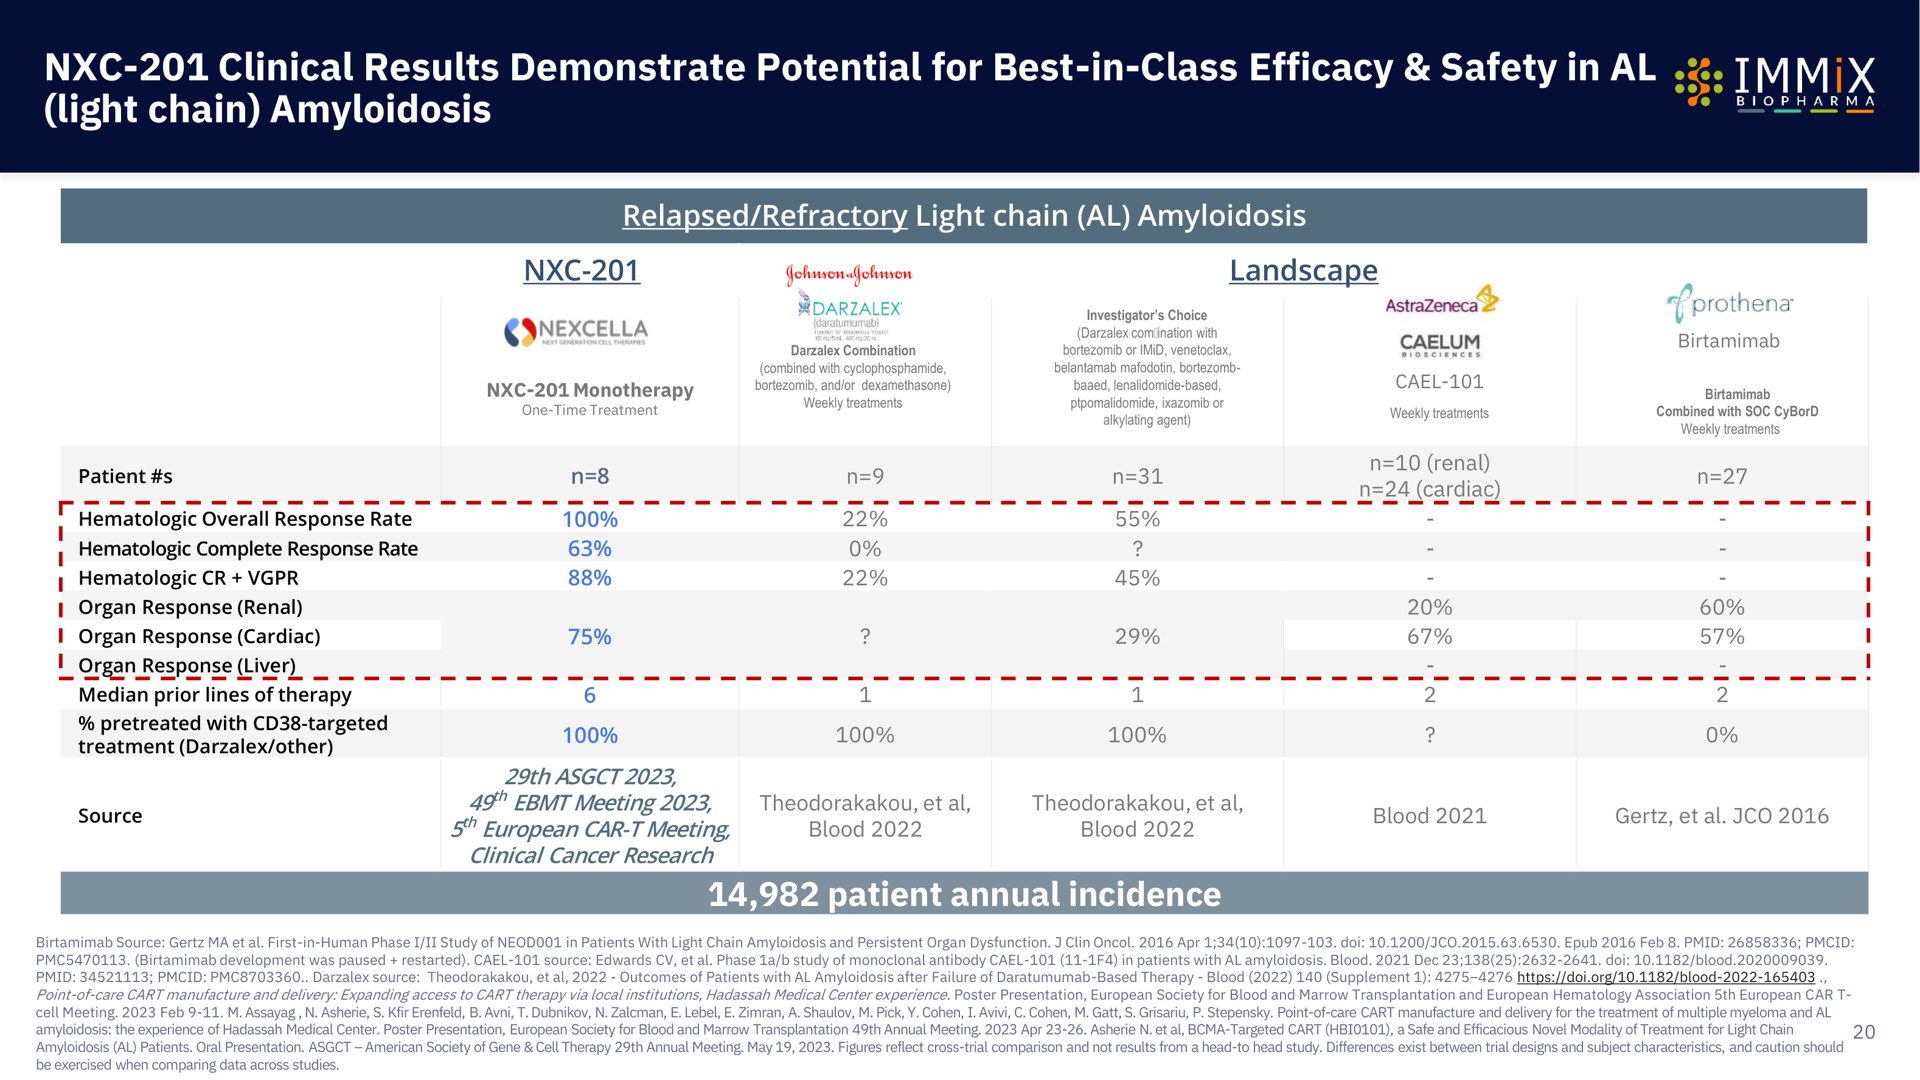 clinical results demonstrate potential for best in class efficacy safety in light chain amyloidosis lote ret | Immix Biopharma